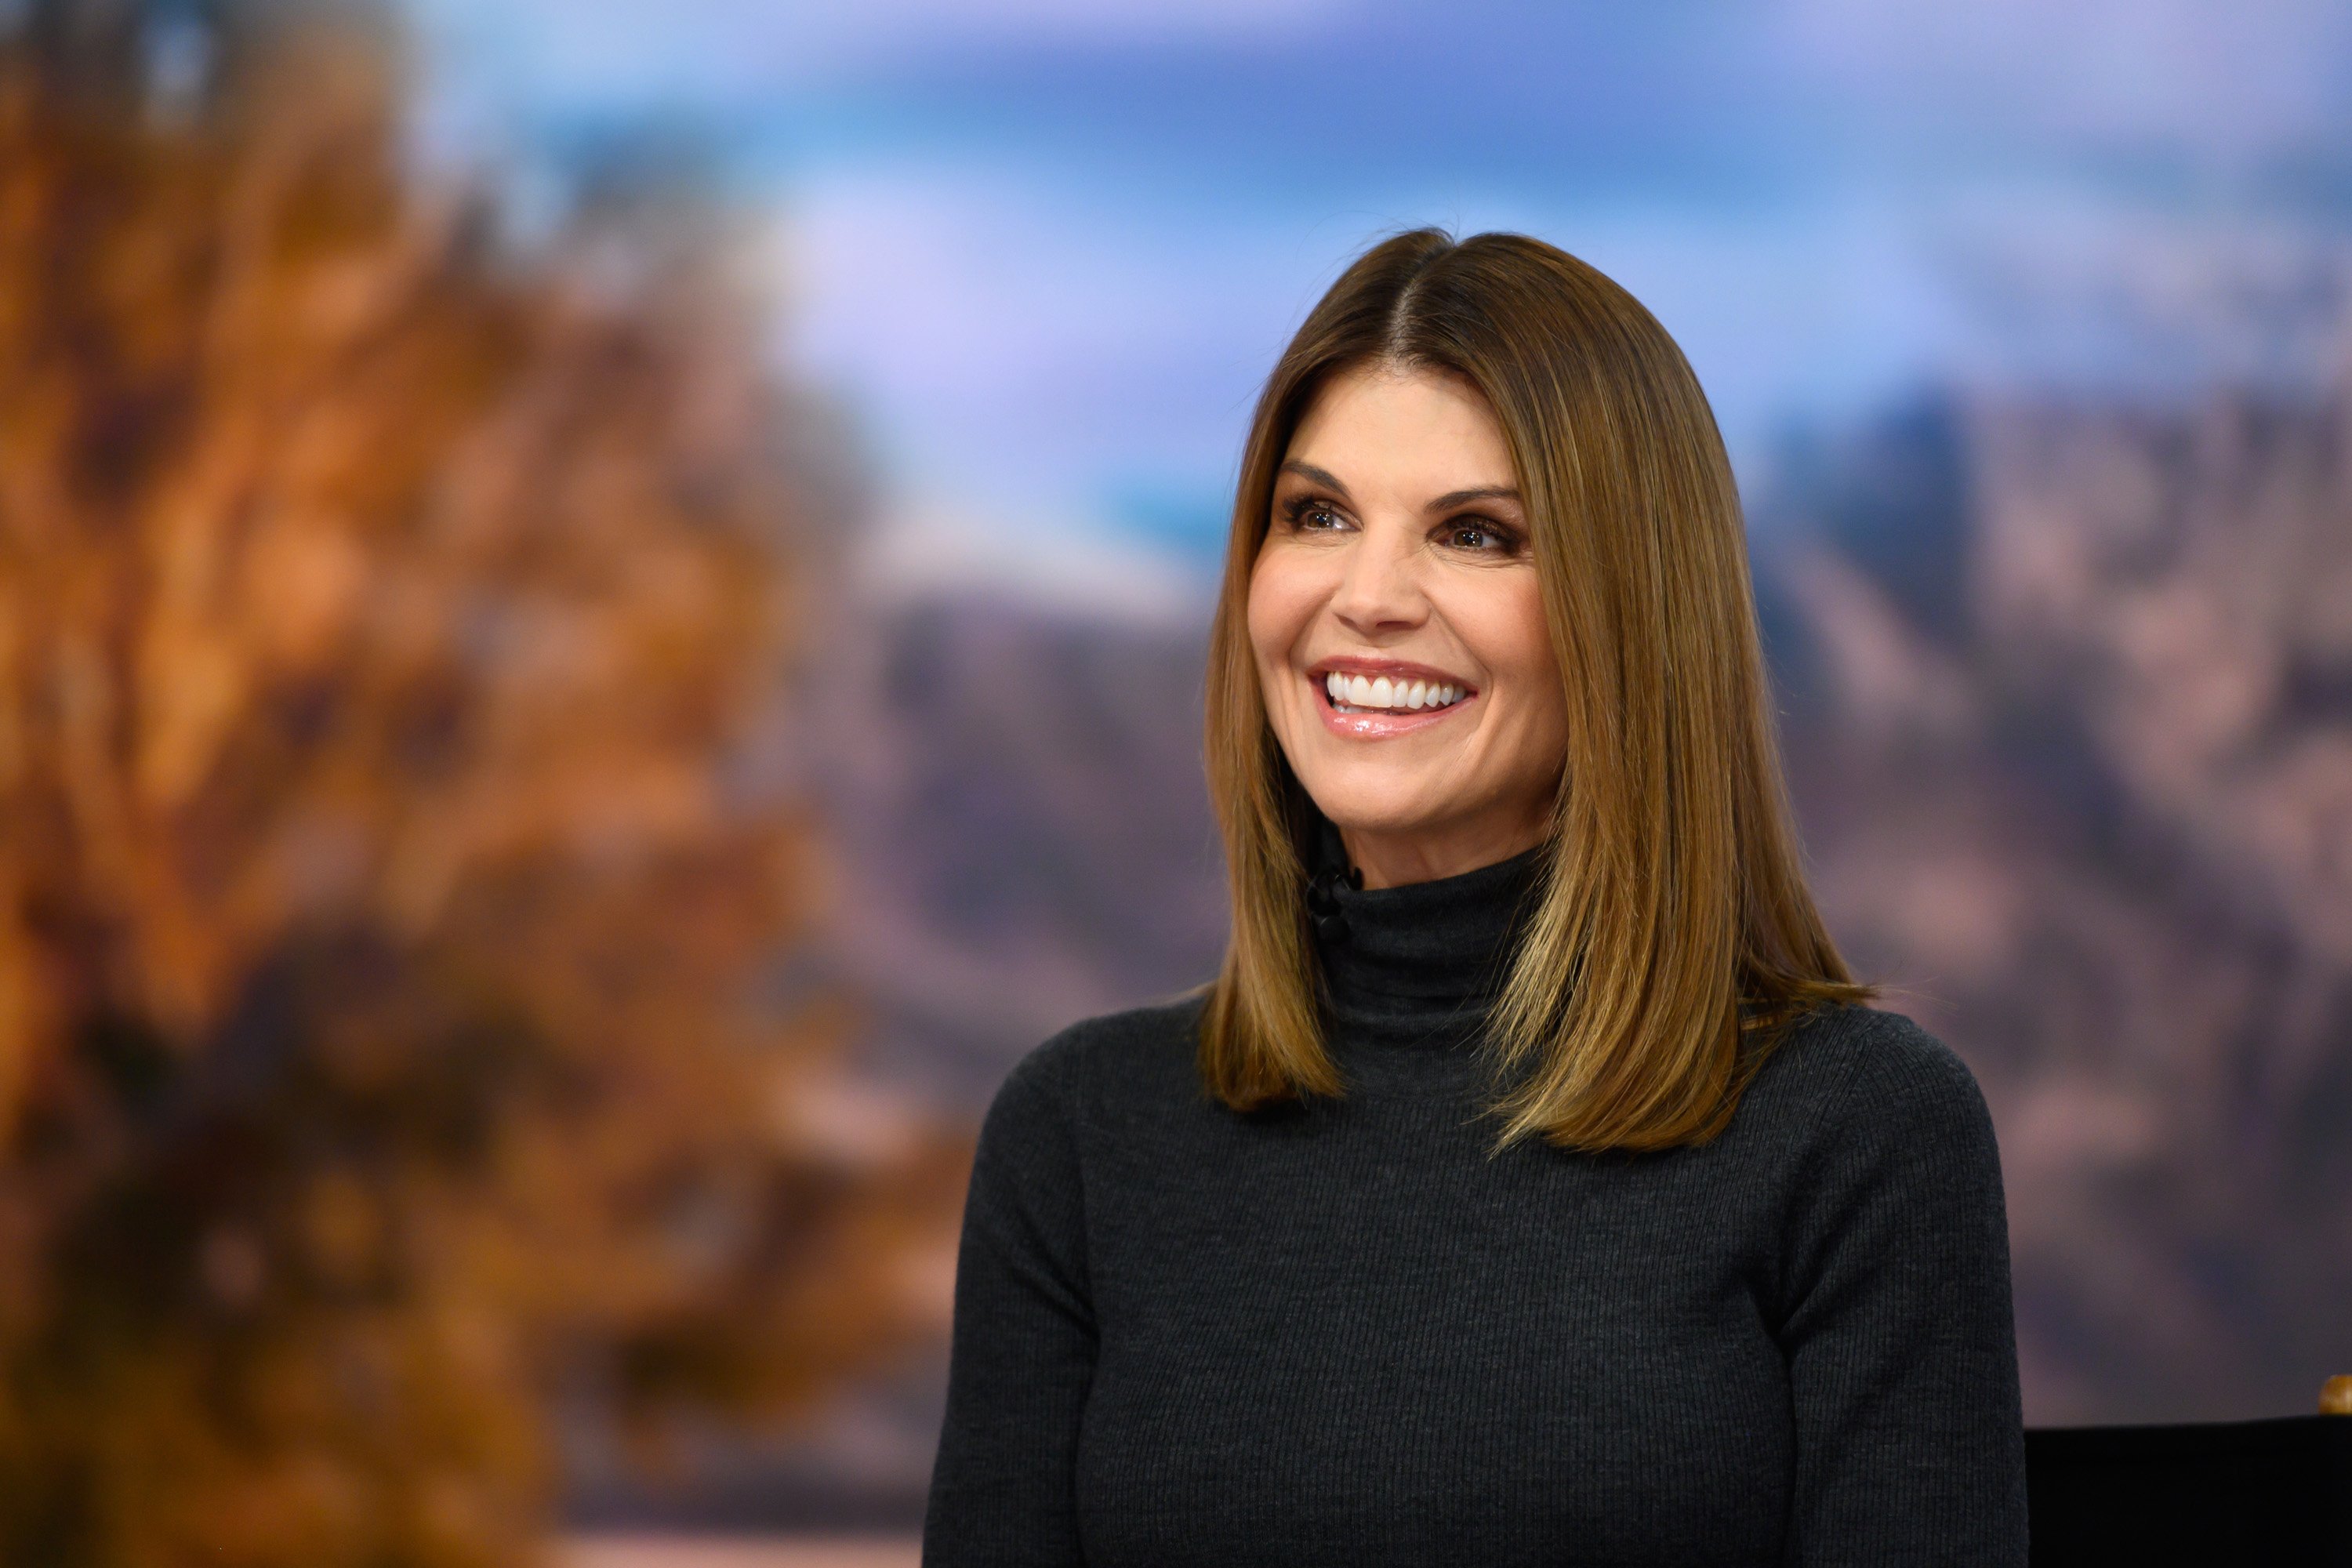 Ex-‘When Calls the Heart’ Star Lori Loughlin Not Welcome Back at Hallmark Channel, Network Confirms